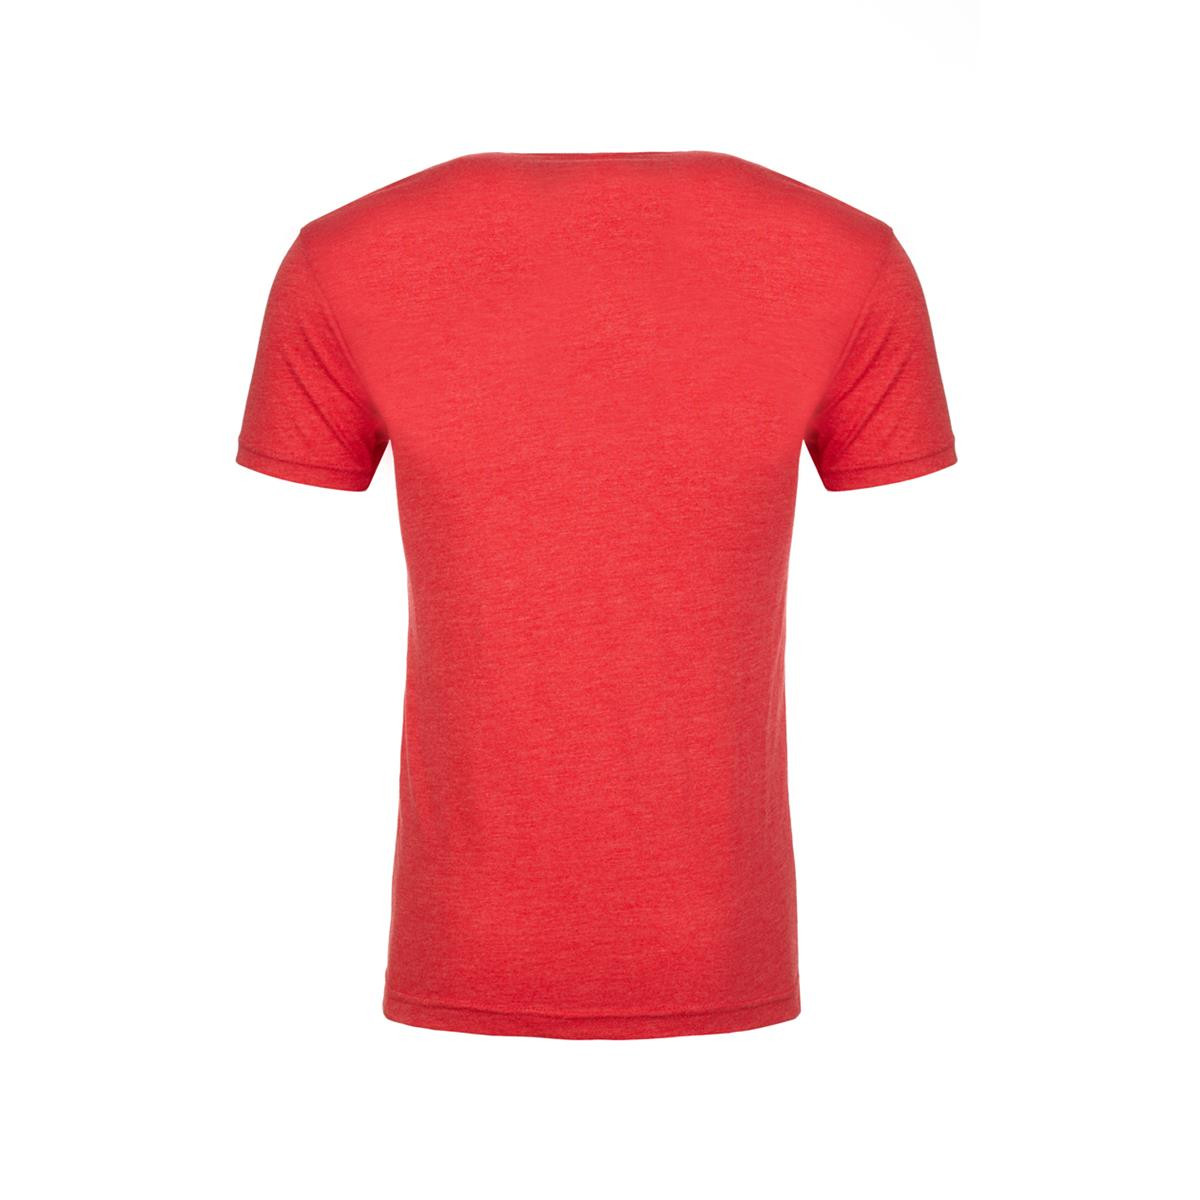 Promotional Men's Tri-Blend Crew Tees | Promotion Products